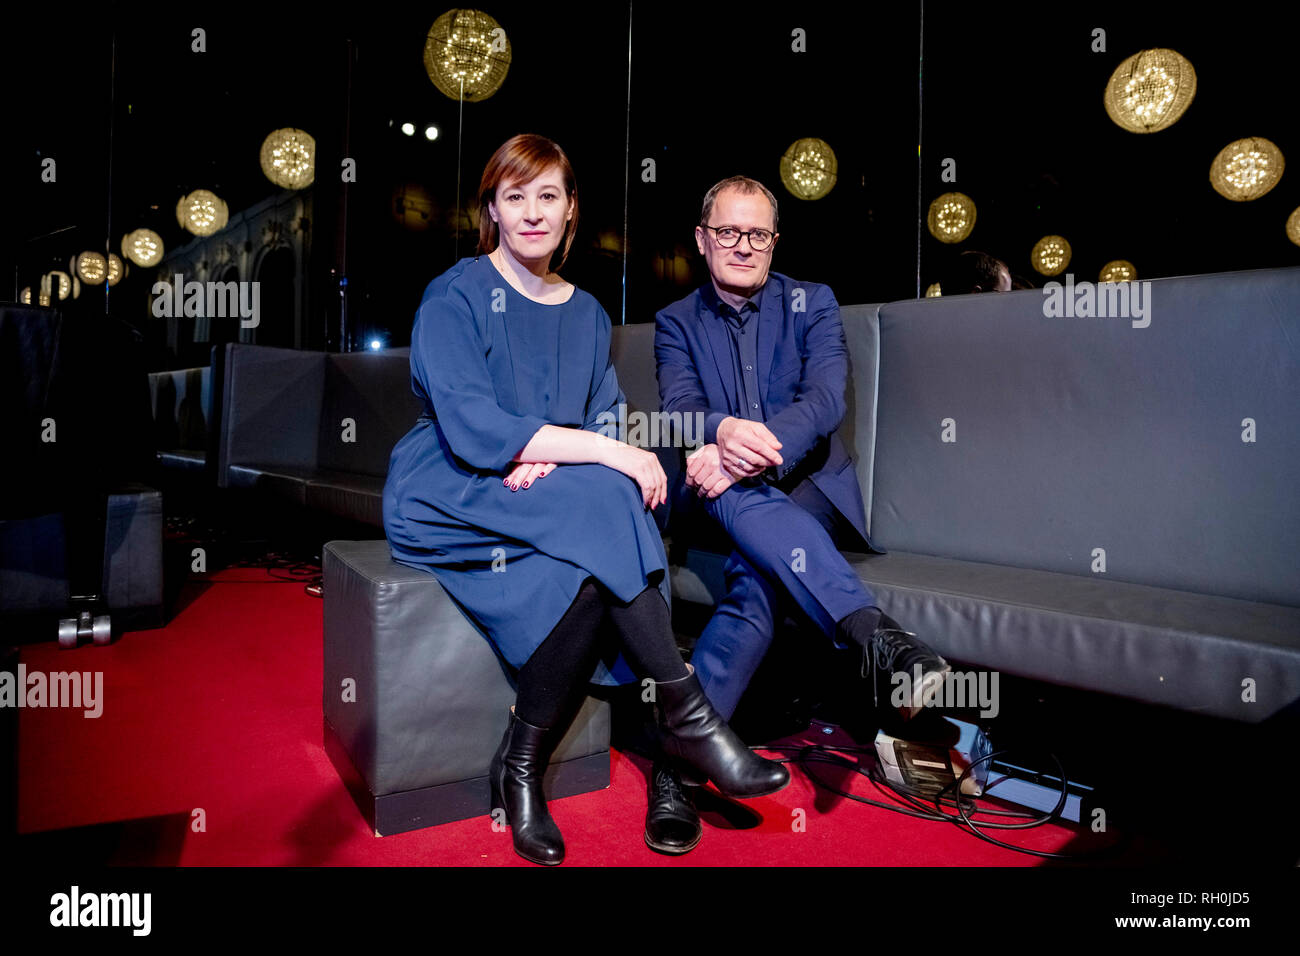 Berlin, Germany. 31st Jan, 2019. Susanne Moser, managing director and designated co-director of the Komische Oper Berlin, and Philip Bröking, opera director and designated co-director of the Komische Oper Berlin, are sitting in the foyer of the Komische Oper Berlin after a press conference on the future of the Komische Oper Berlin. Credit: Christoph Soeder/dpa/Alamy Live News Stock Photo